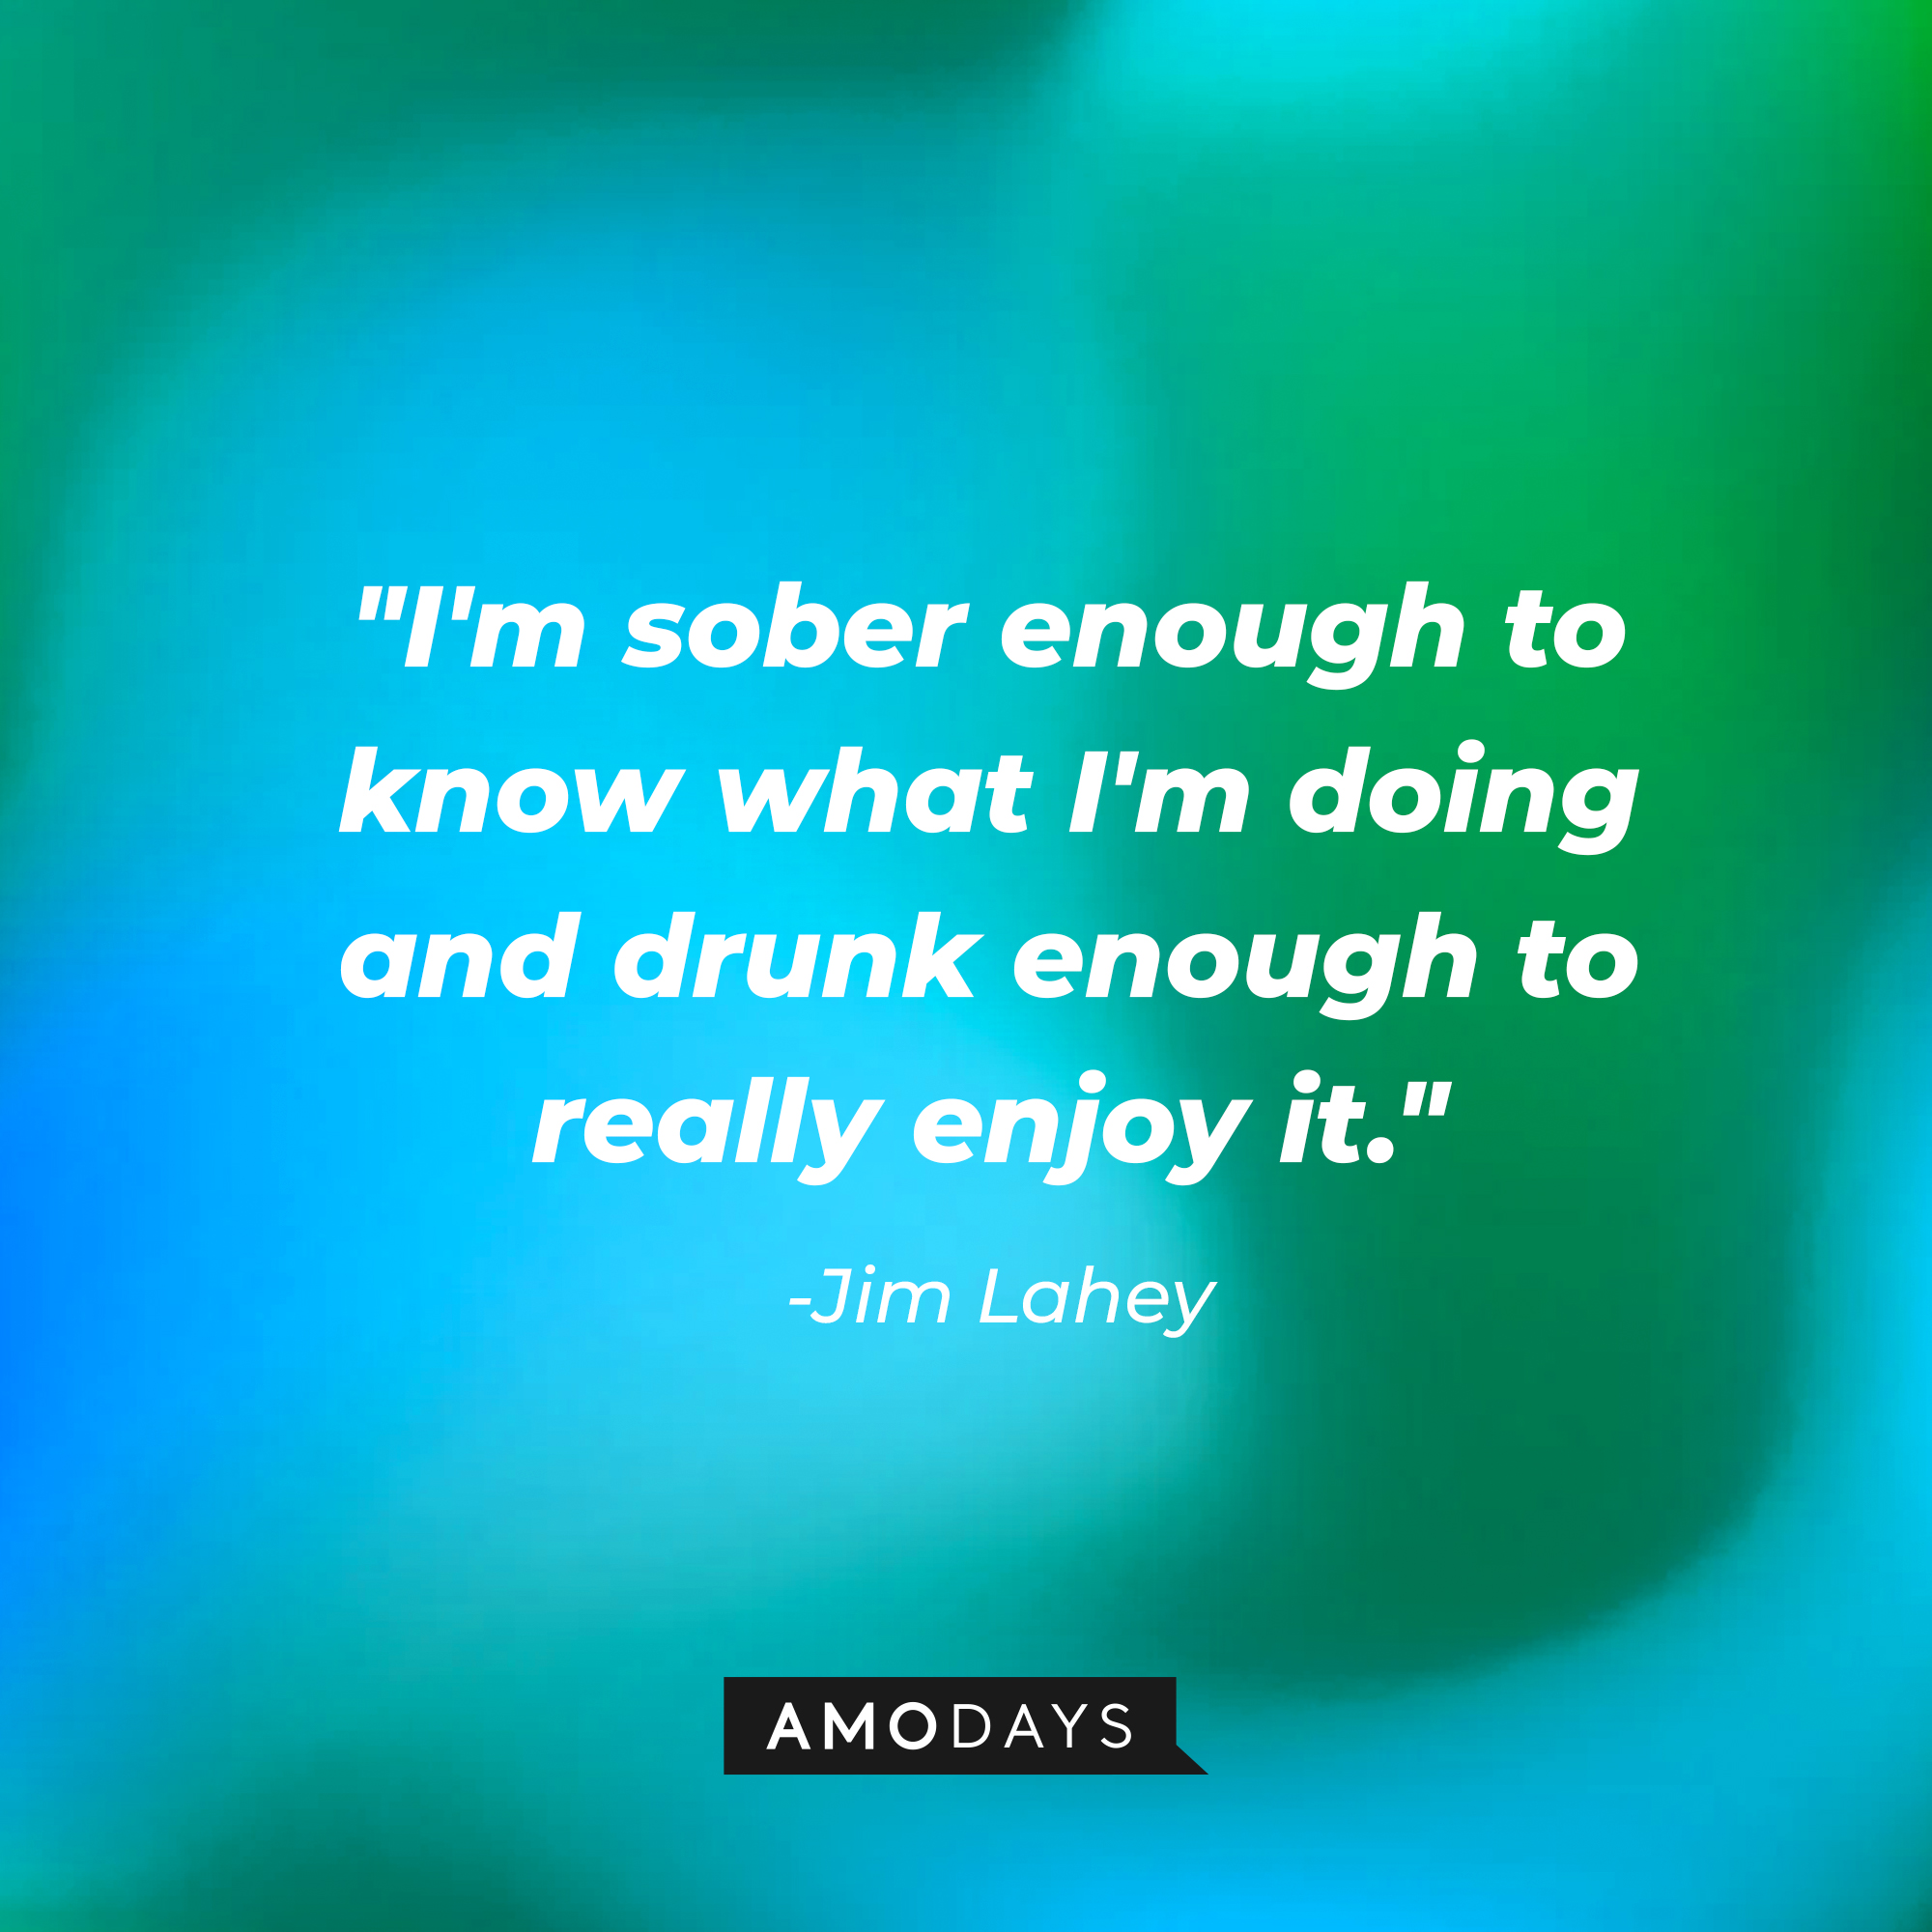 Jim Lahey's quote, "I'm sober enough to know what I'm doing and drunk enough to really enjoy it." | Source: AmoDays